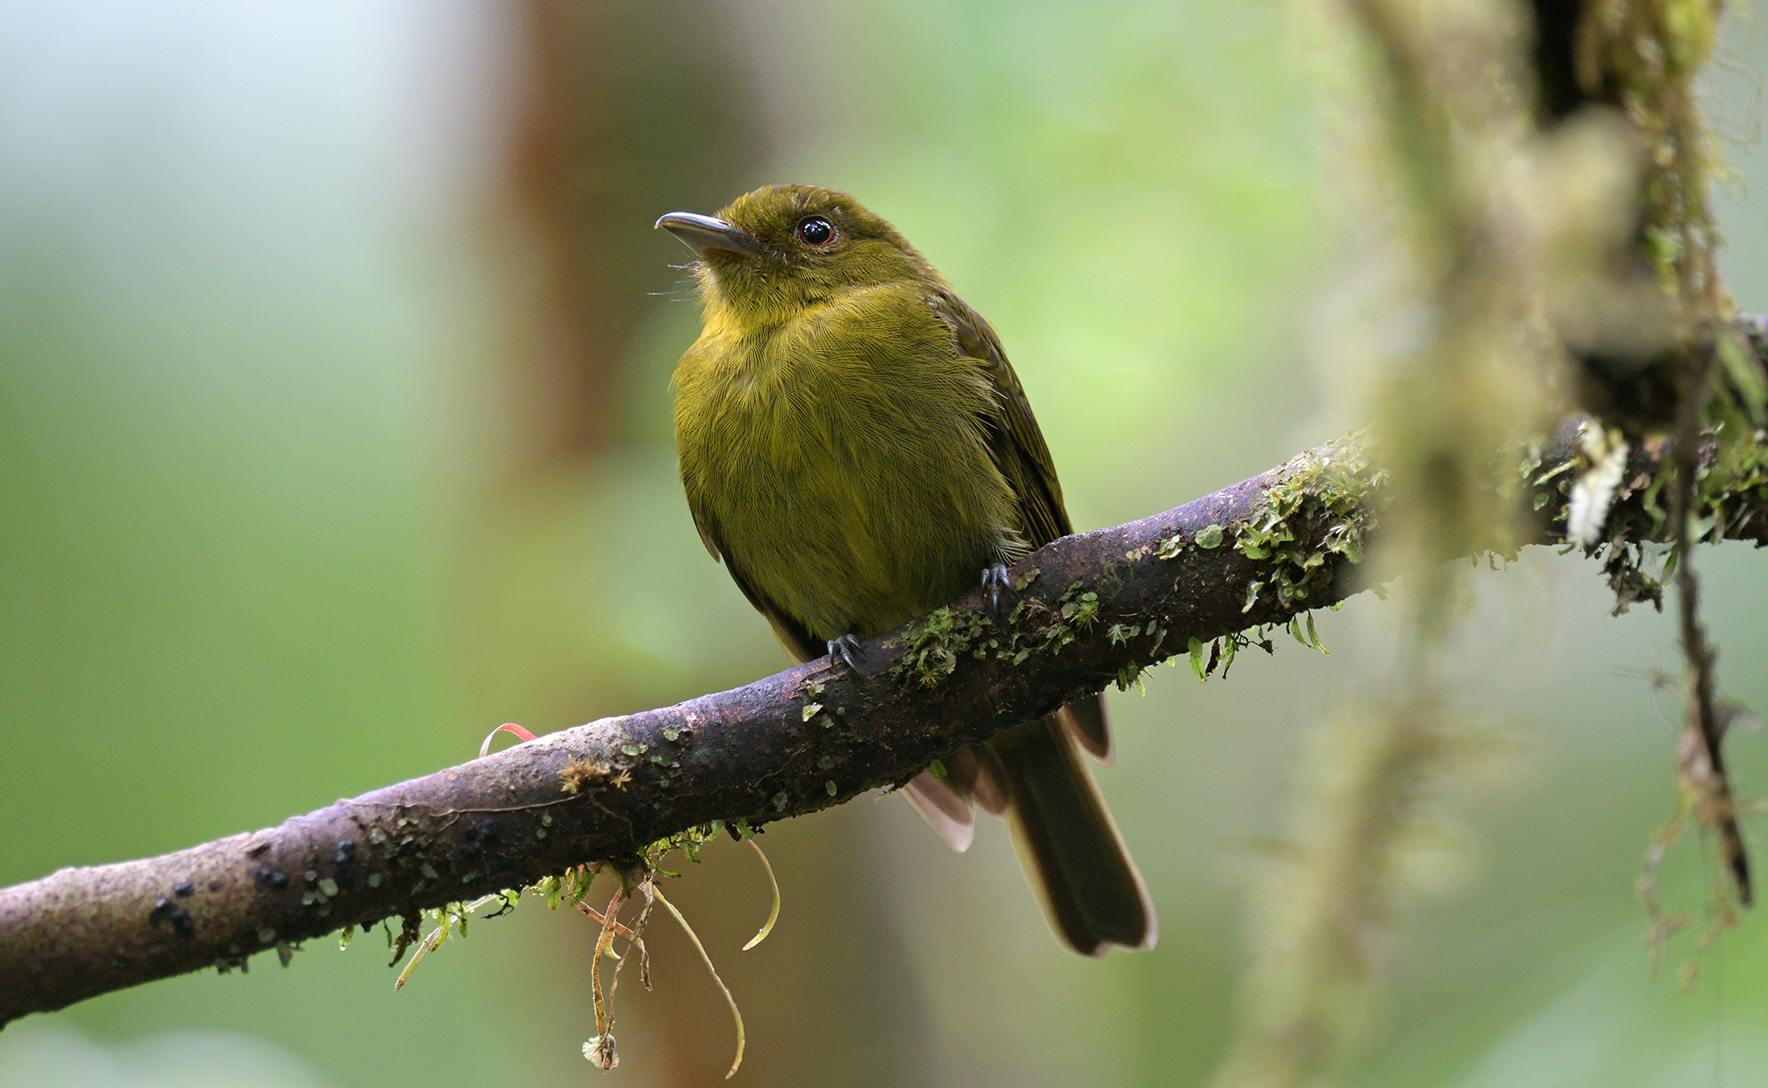 A yellow-green breasted bird sits on a branch. 